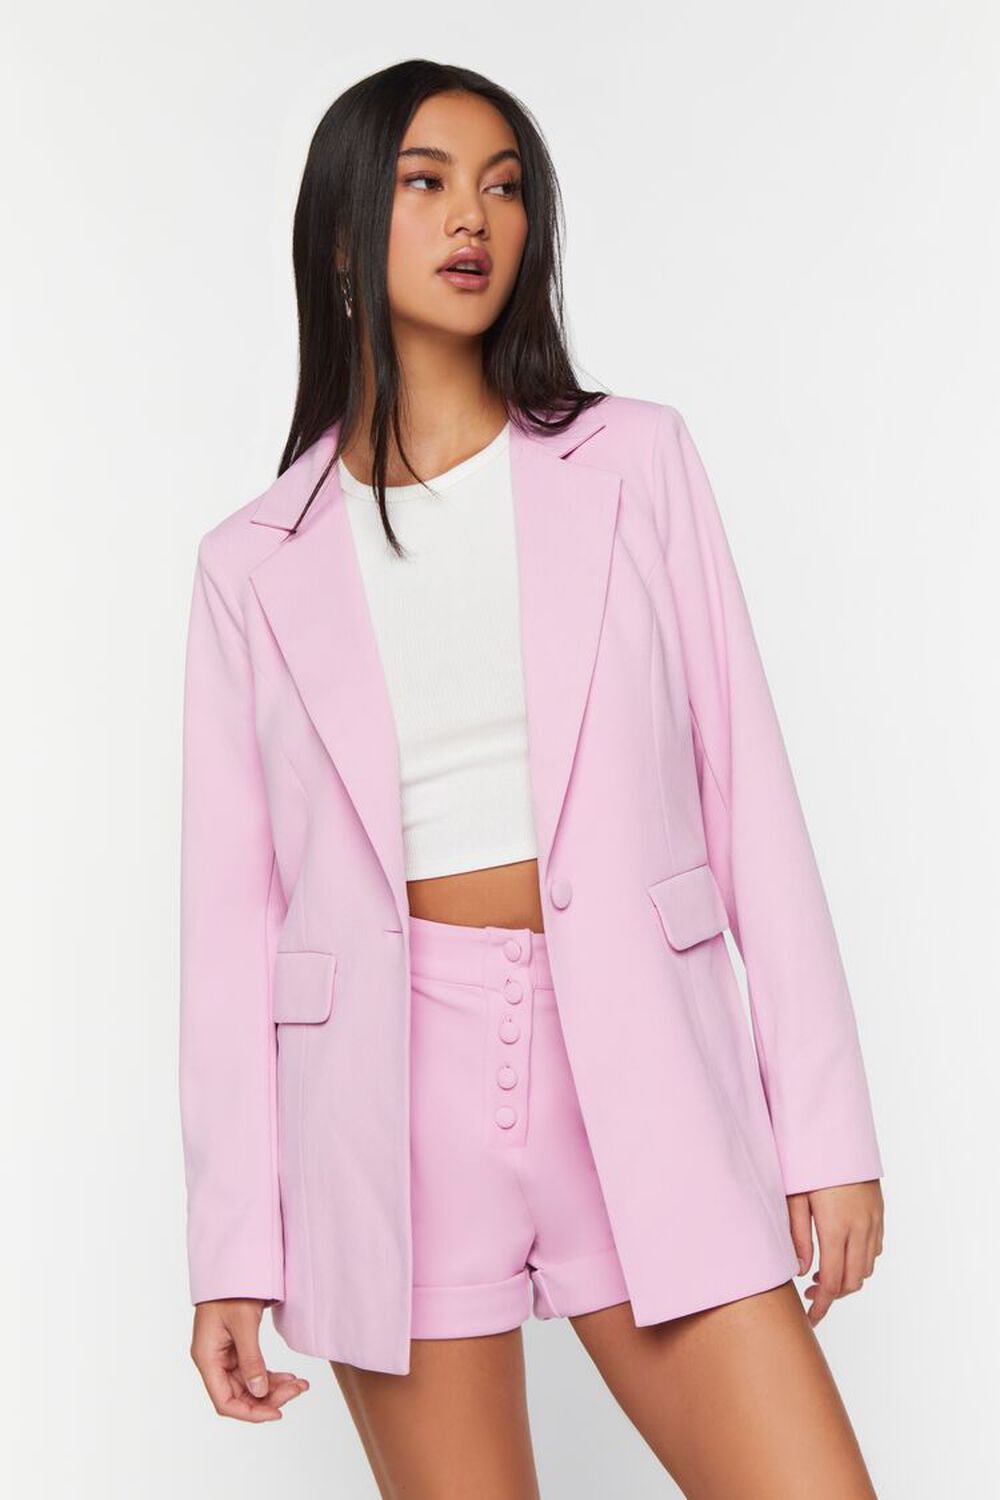 PINK Notched Buttoned Blazer, image 1